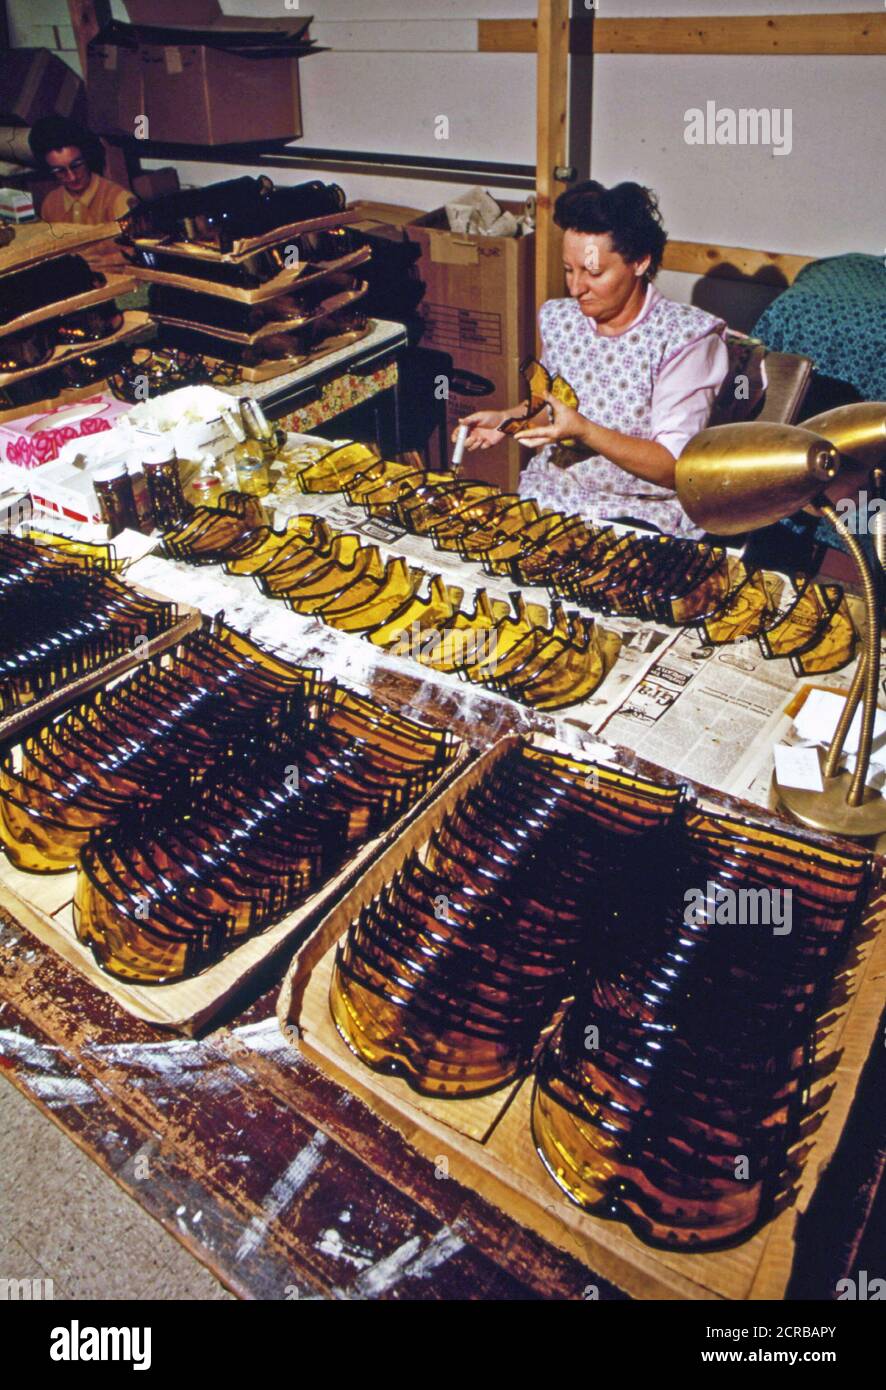 Antonelli Industries, Rifle, a Ski Goggles Factory, Employs Fourteen Workers Most of Whom Are Farm Wives, 01 1973 Stock Photo